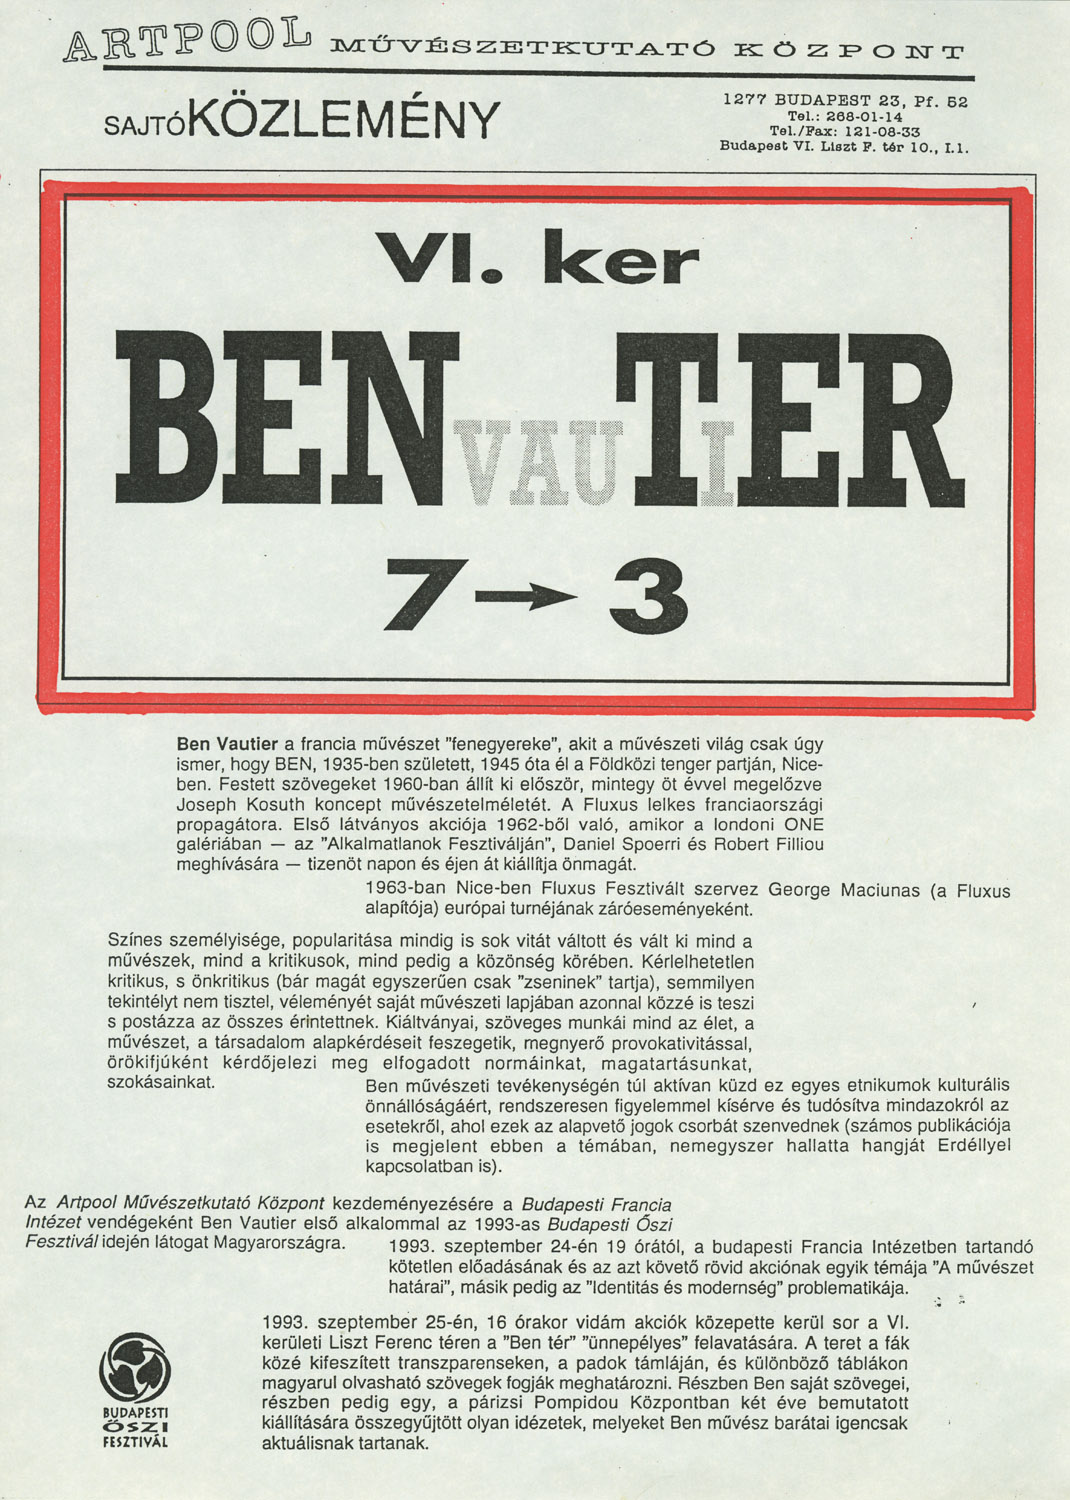 Press release for the inauguration of the Ben Tér and presentation of fluxus artist Ben Vautier visiting Budapest on the invitation of Artpool. On the back: Artpool's program for the Budapest Autumn Festival, 1993 (1st and 2nd page)